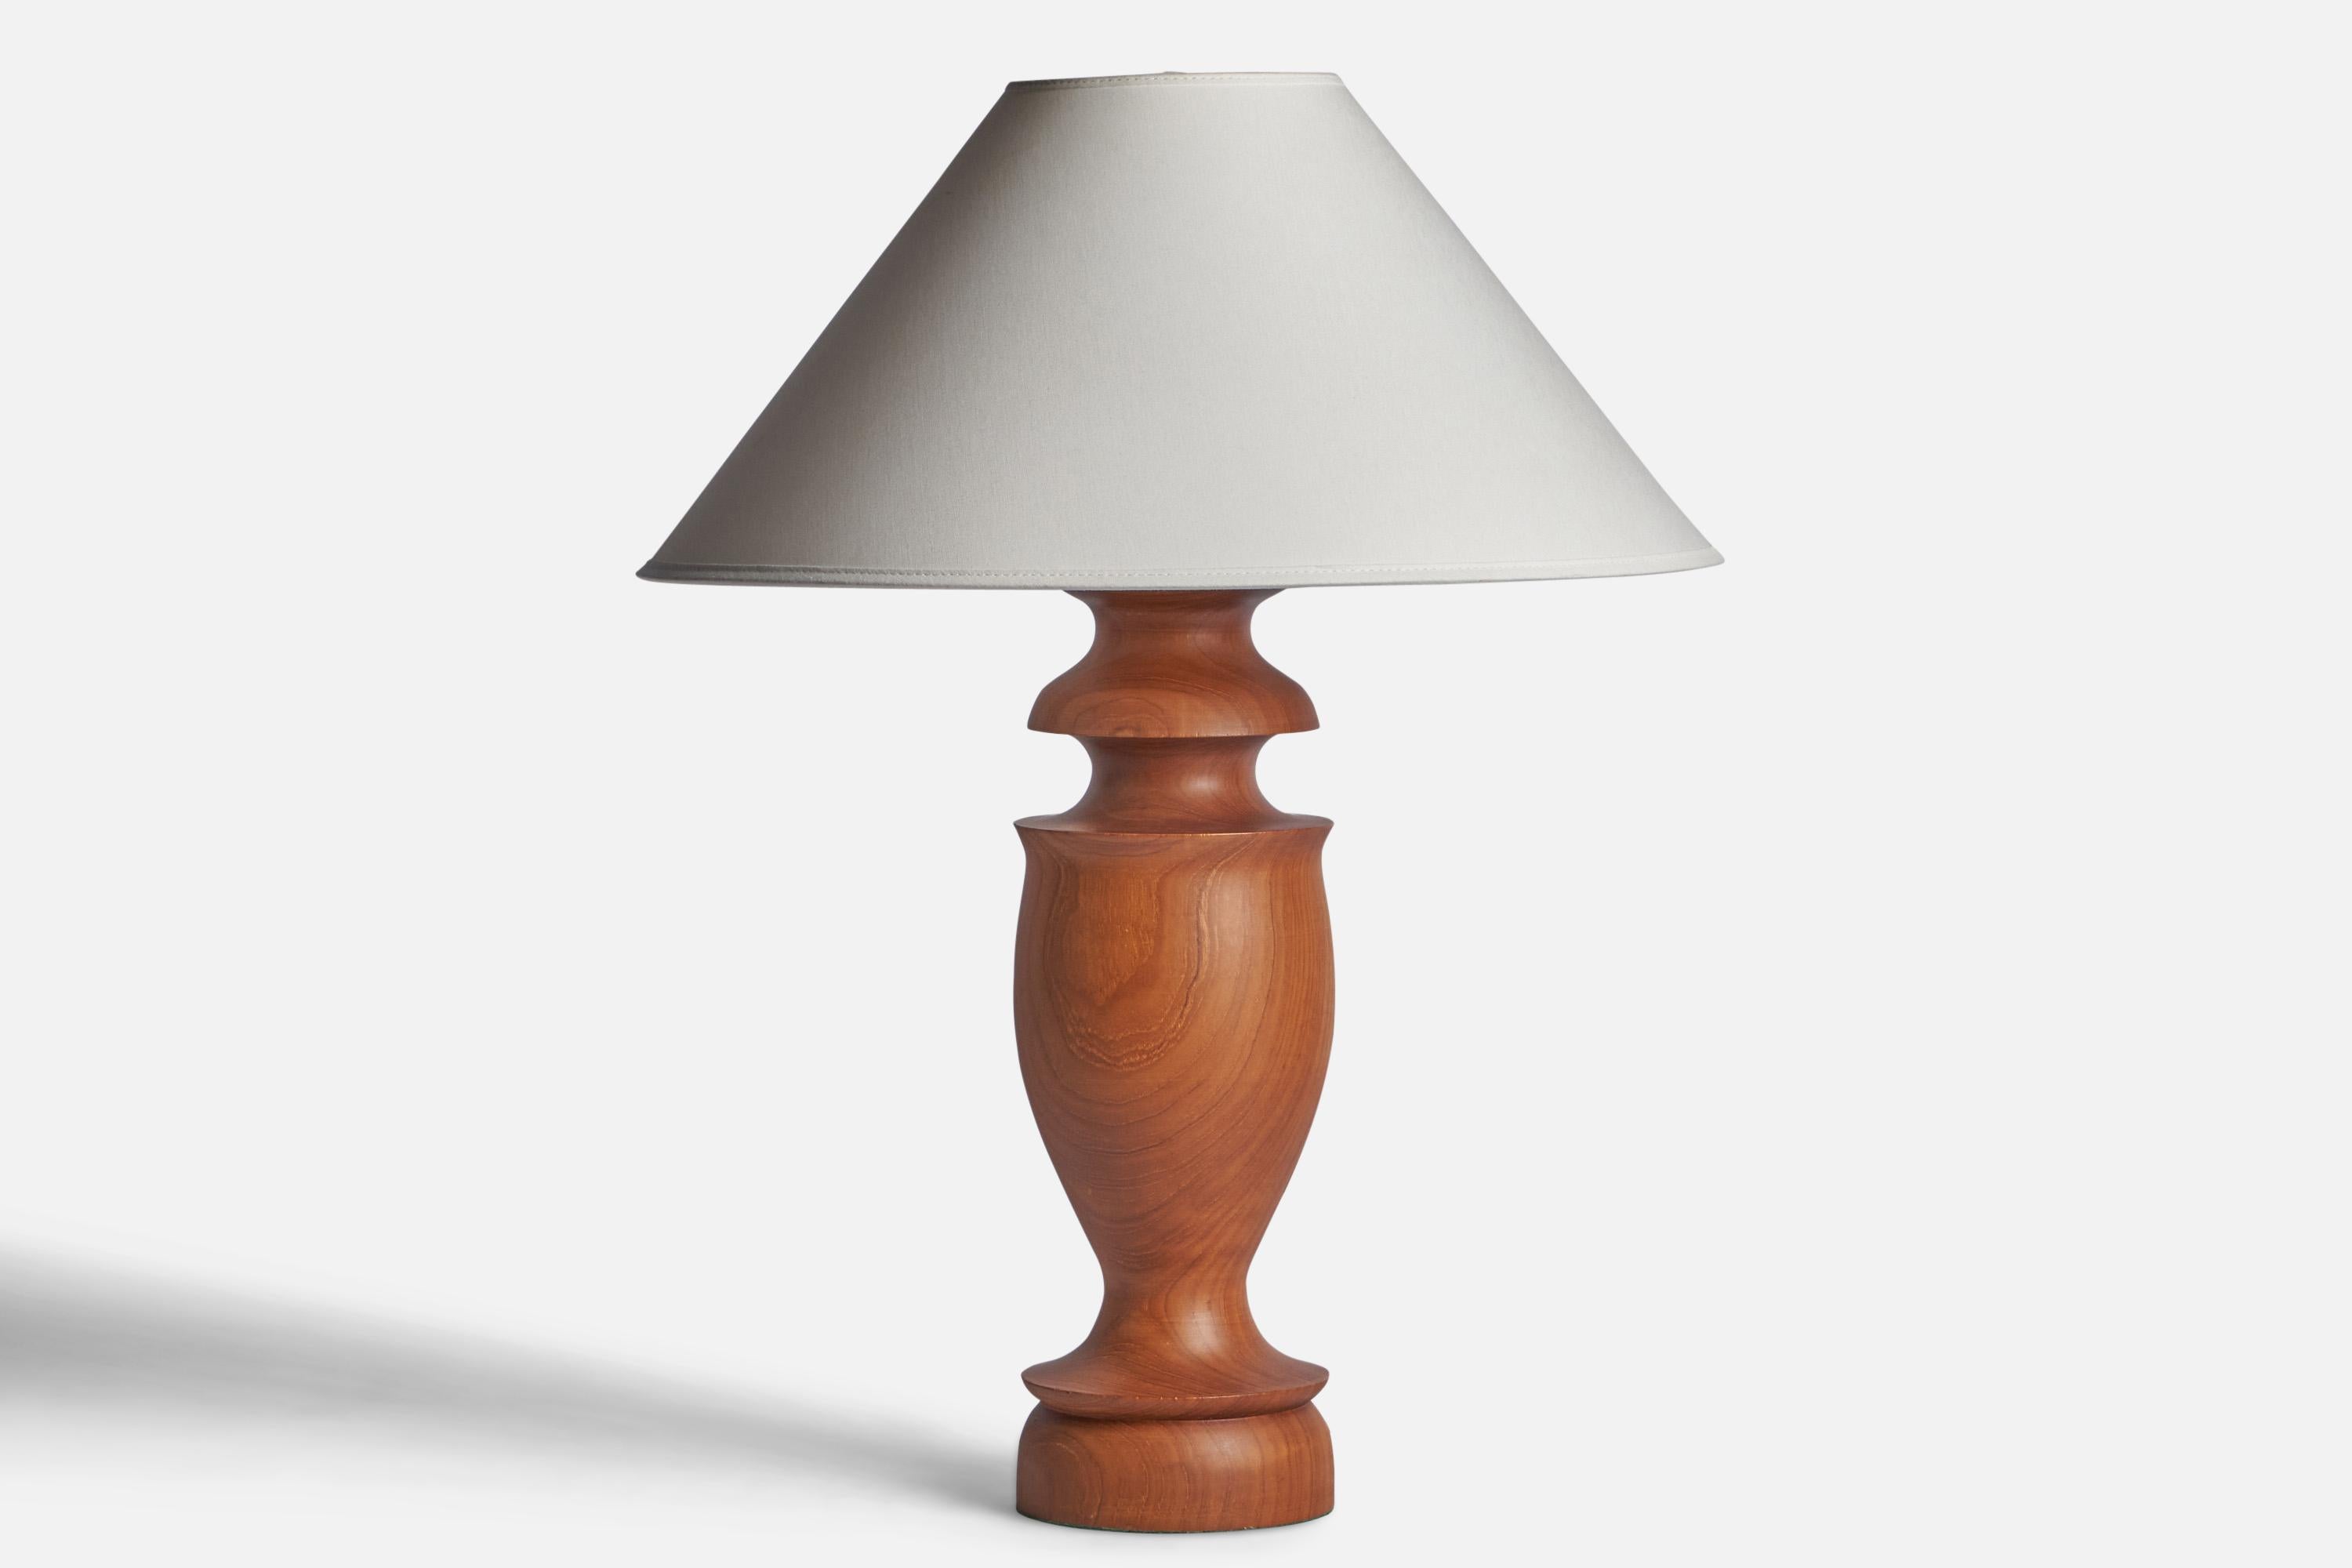 A teak table lamp designed and produced in Sweden, c. 1950s.

Dimensions of Lamp (inches): 16.95” H x 4.75” Diameter
Dimensions of Shade (inches): 4.5” Top Diameter x 16” Bottom Diameter x 7.25” H
Dimensions of Lamp with Shade (inches): 21.95” H x